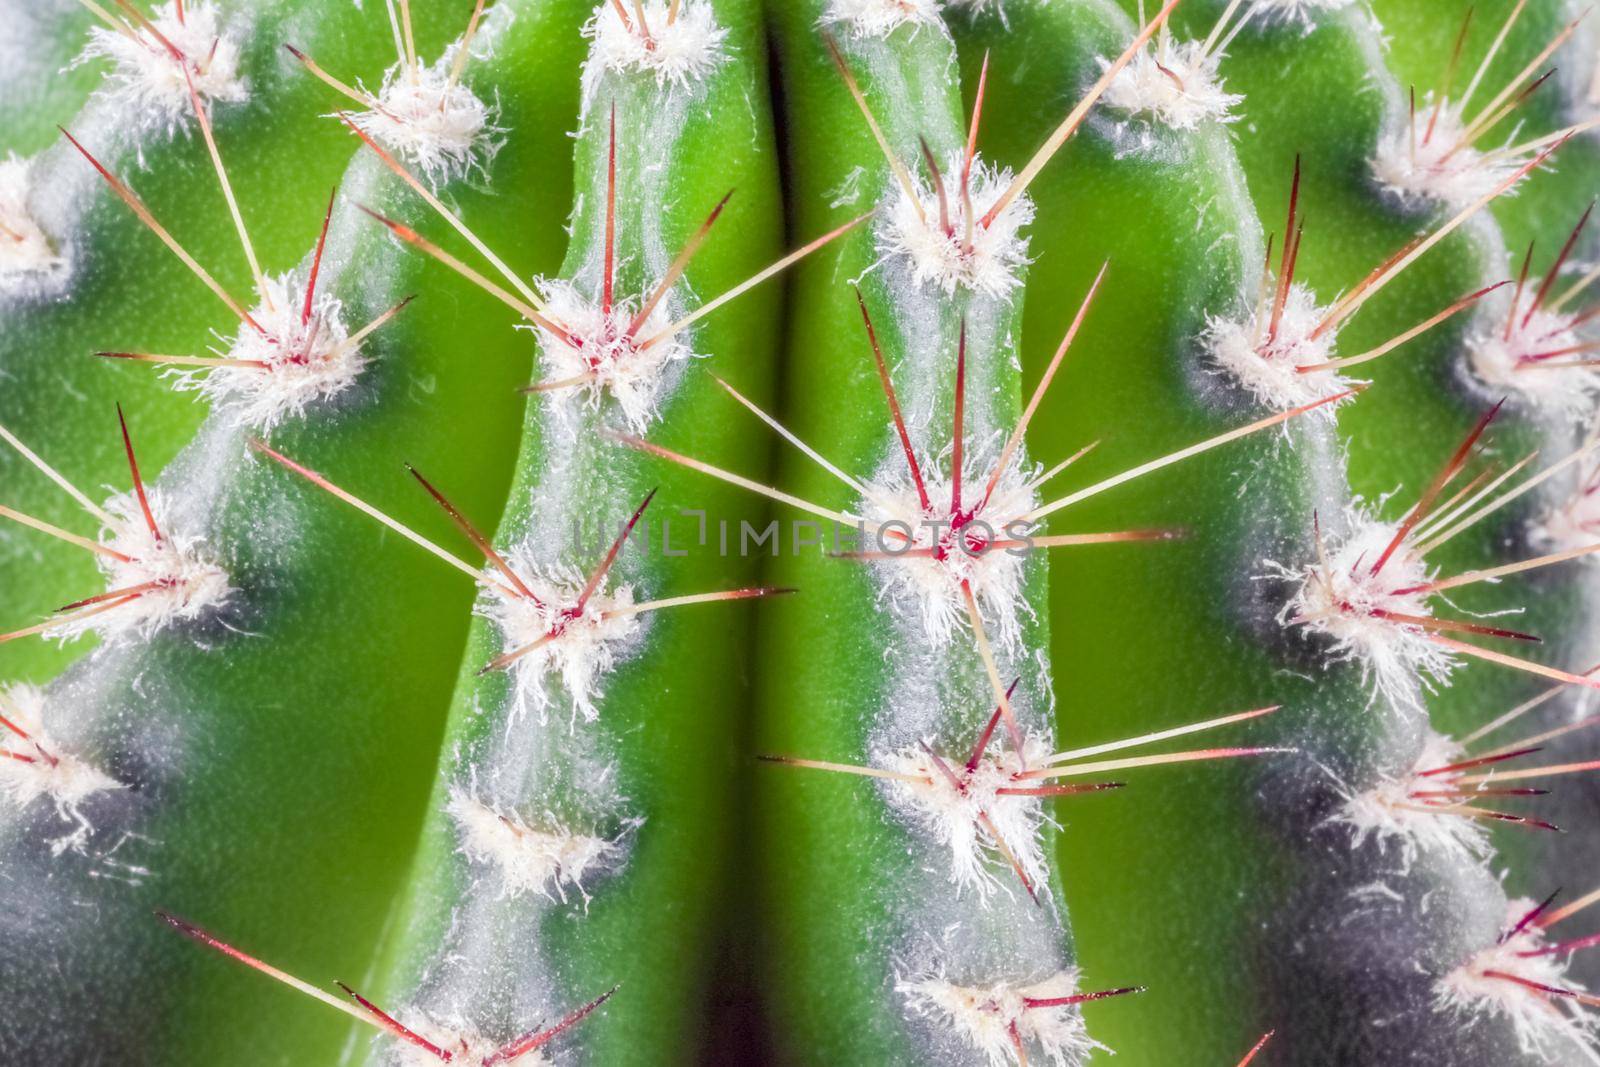 cactus close up on the entire frame as a background by roman112007